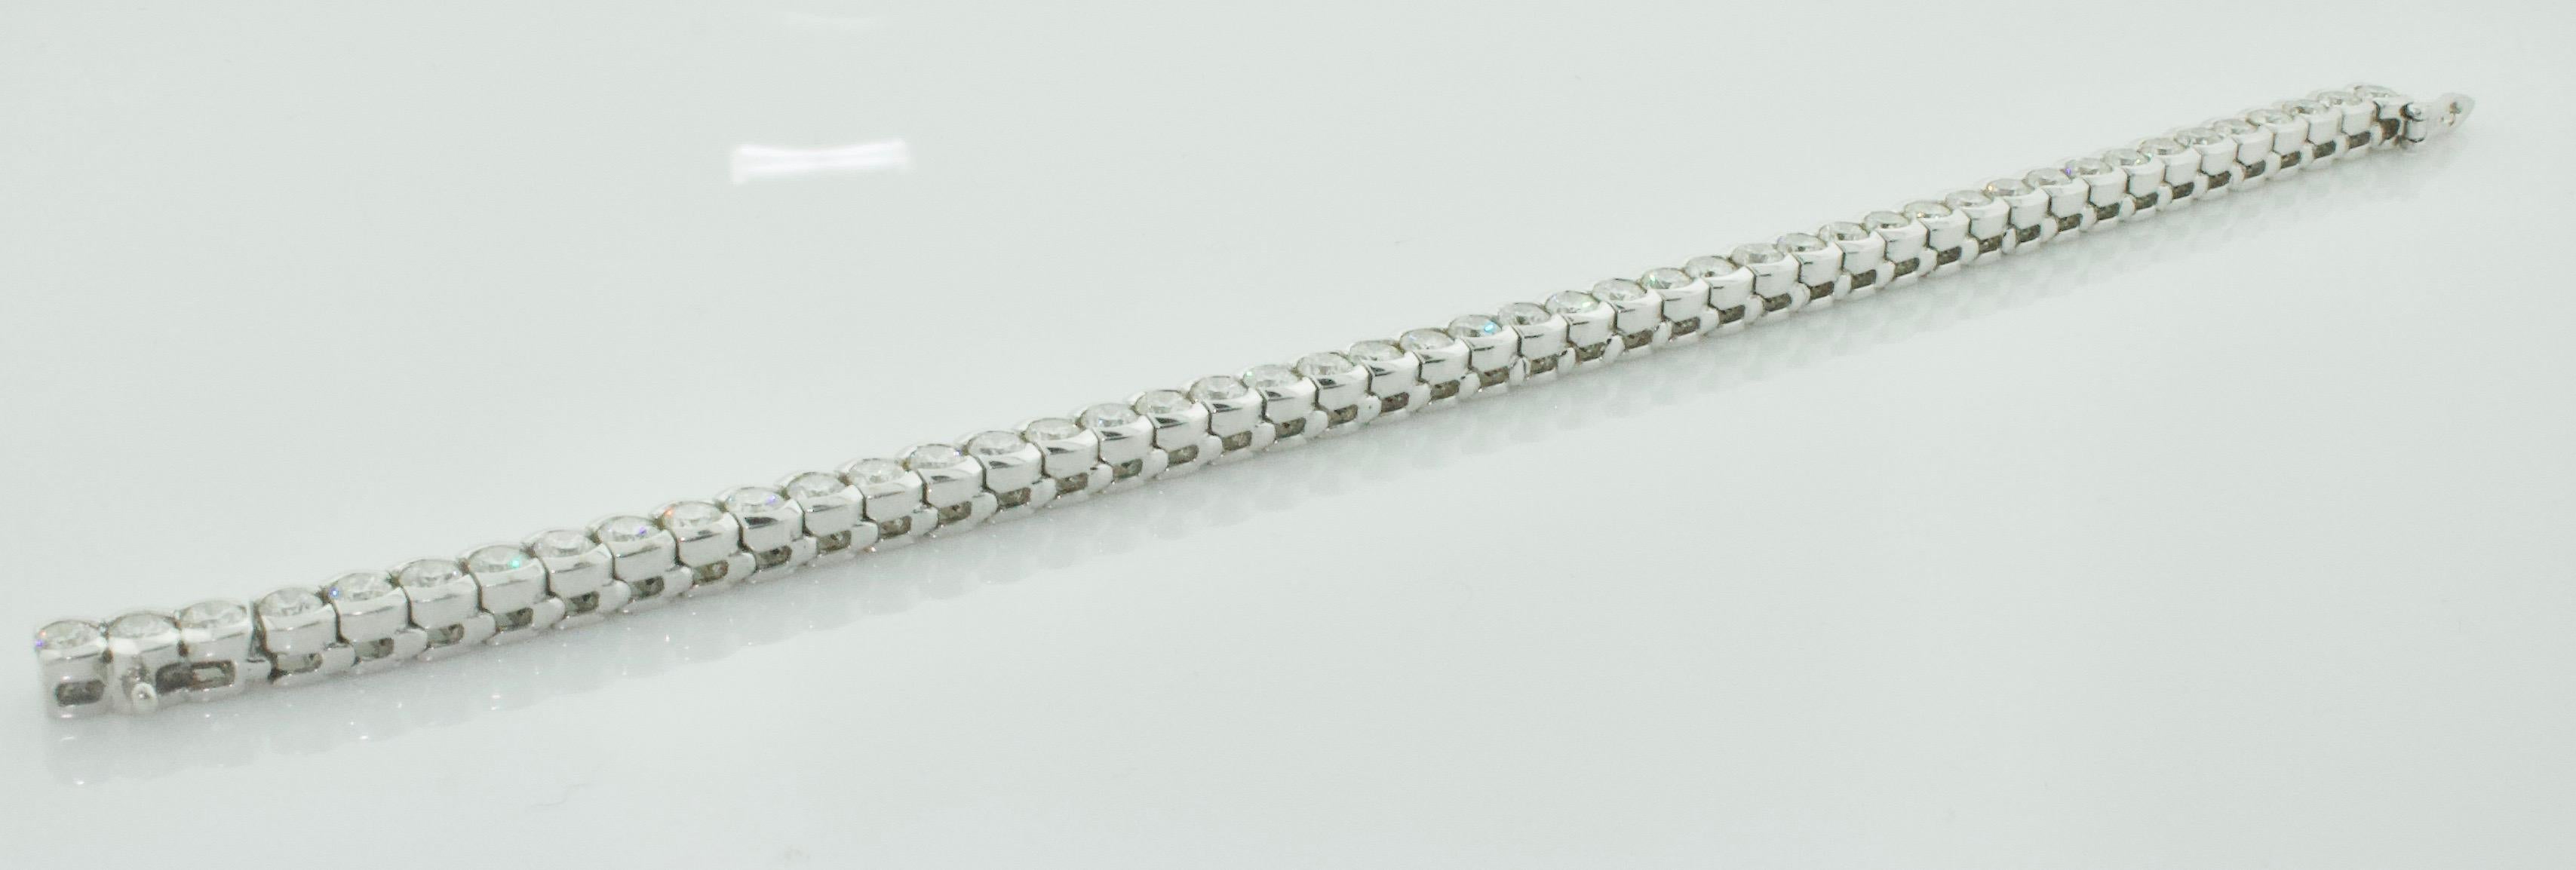 Diamond Straight Line Bracelet 7.10 Carats in White Gold In Excellent Condition For Sale In Wailea, HI